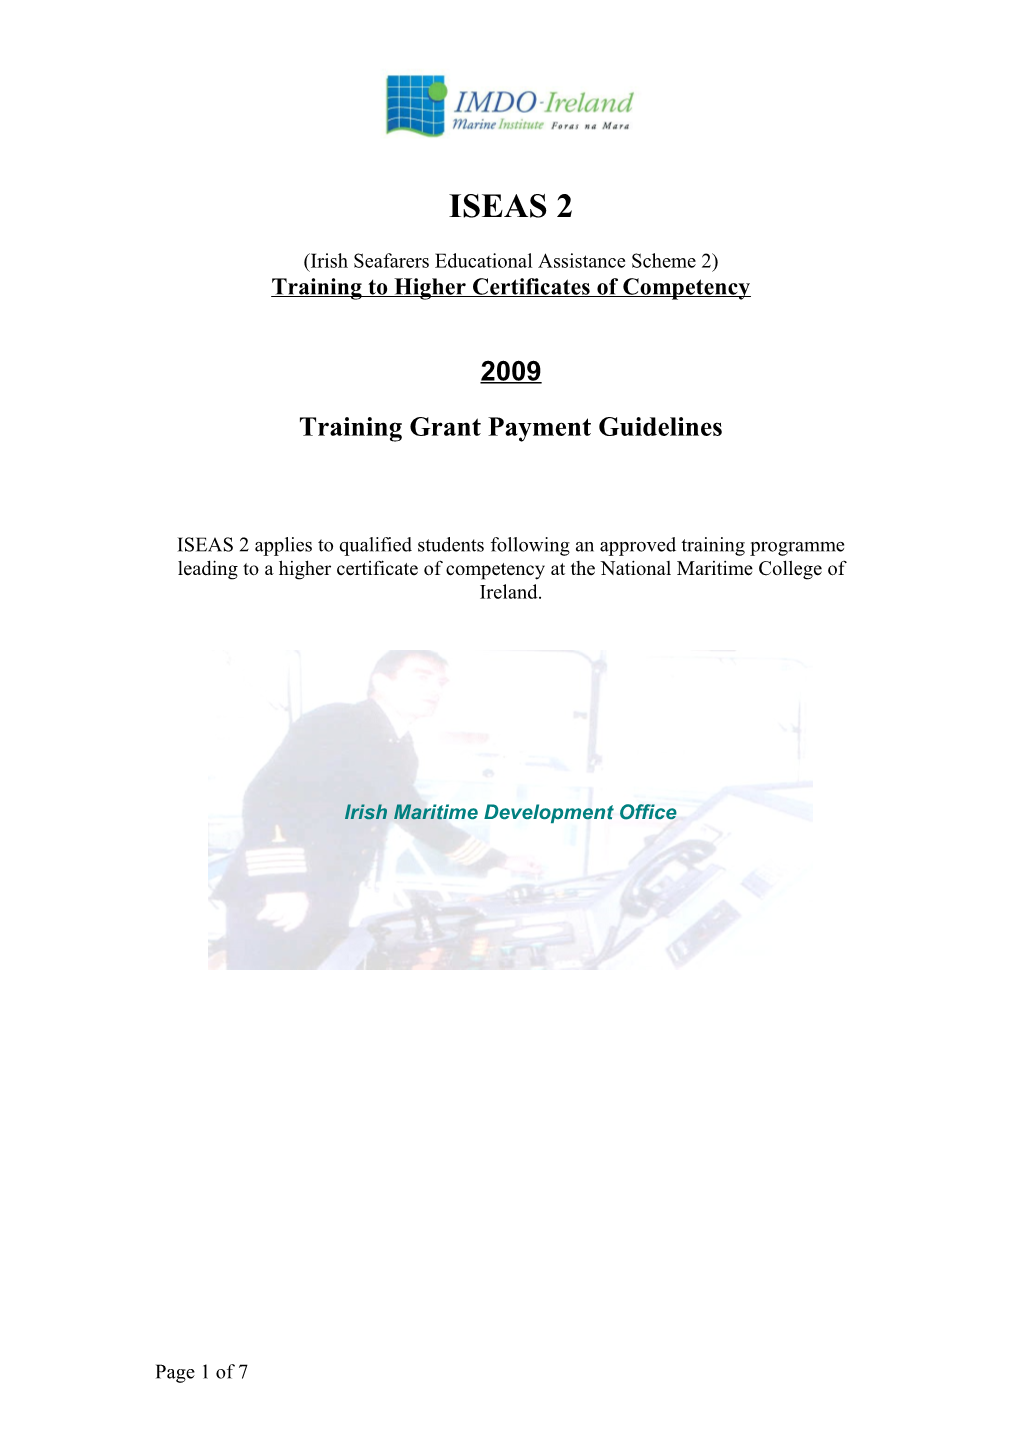 Training to Higher Certificates of Competency